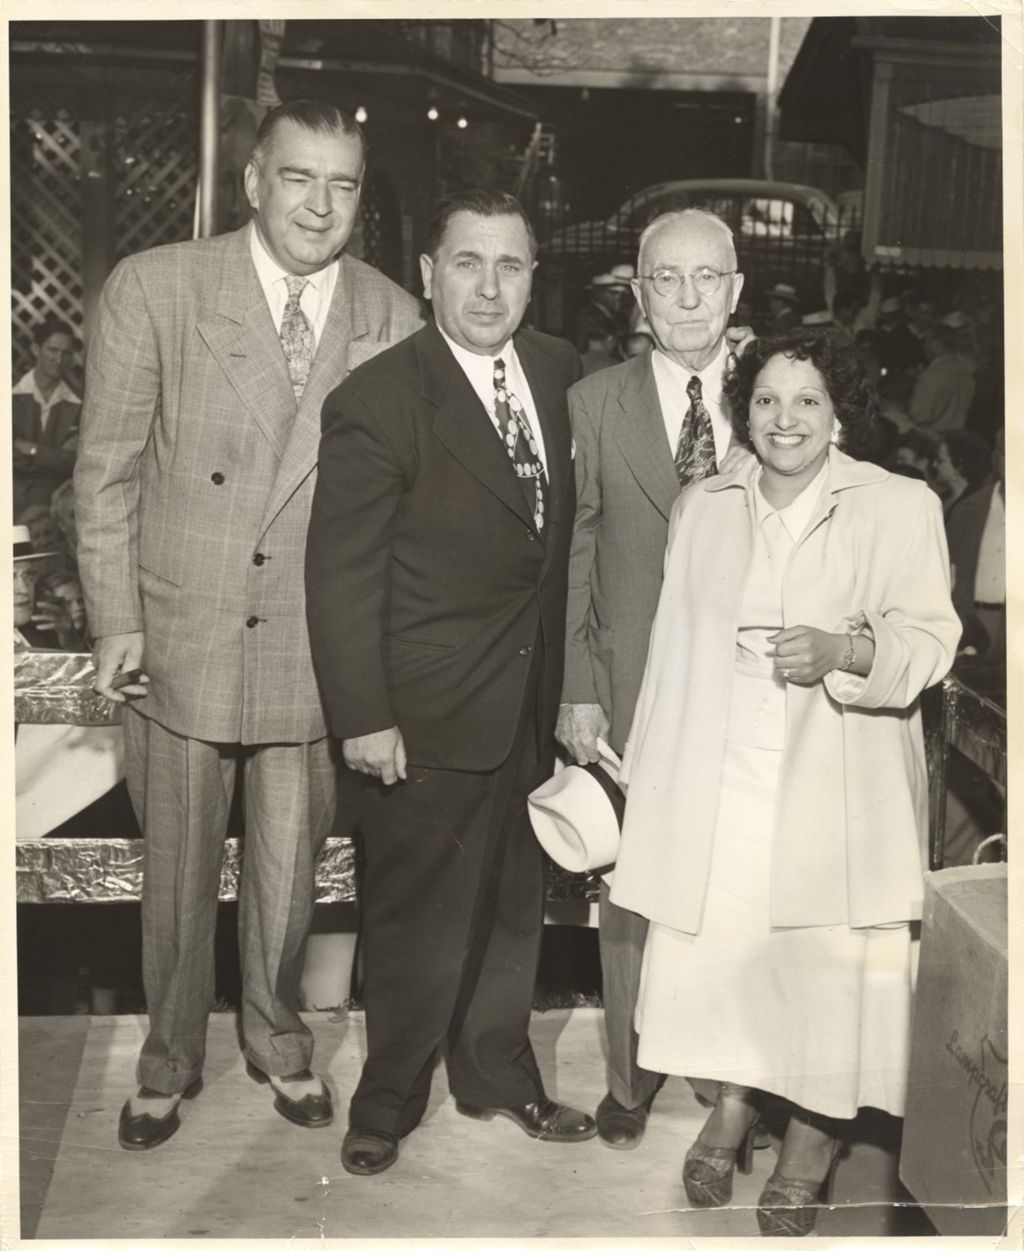 Miniature of Richard J. Daley with others at an outdoor event